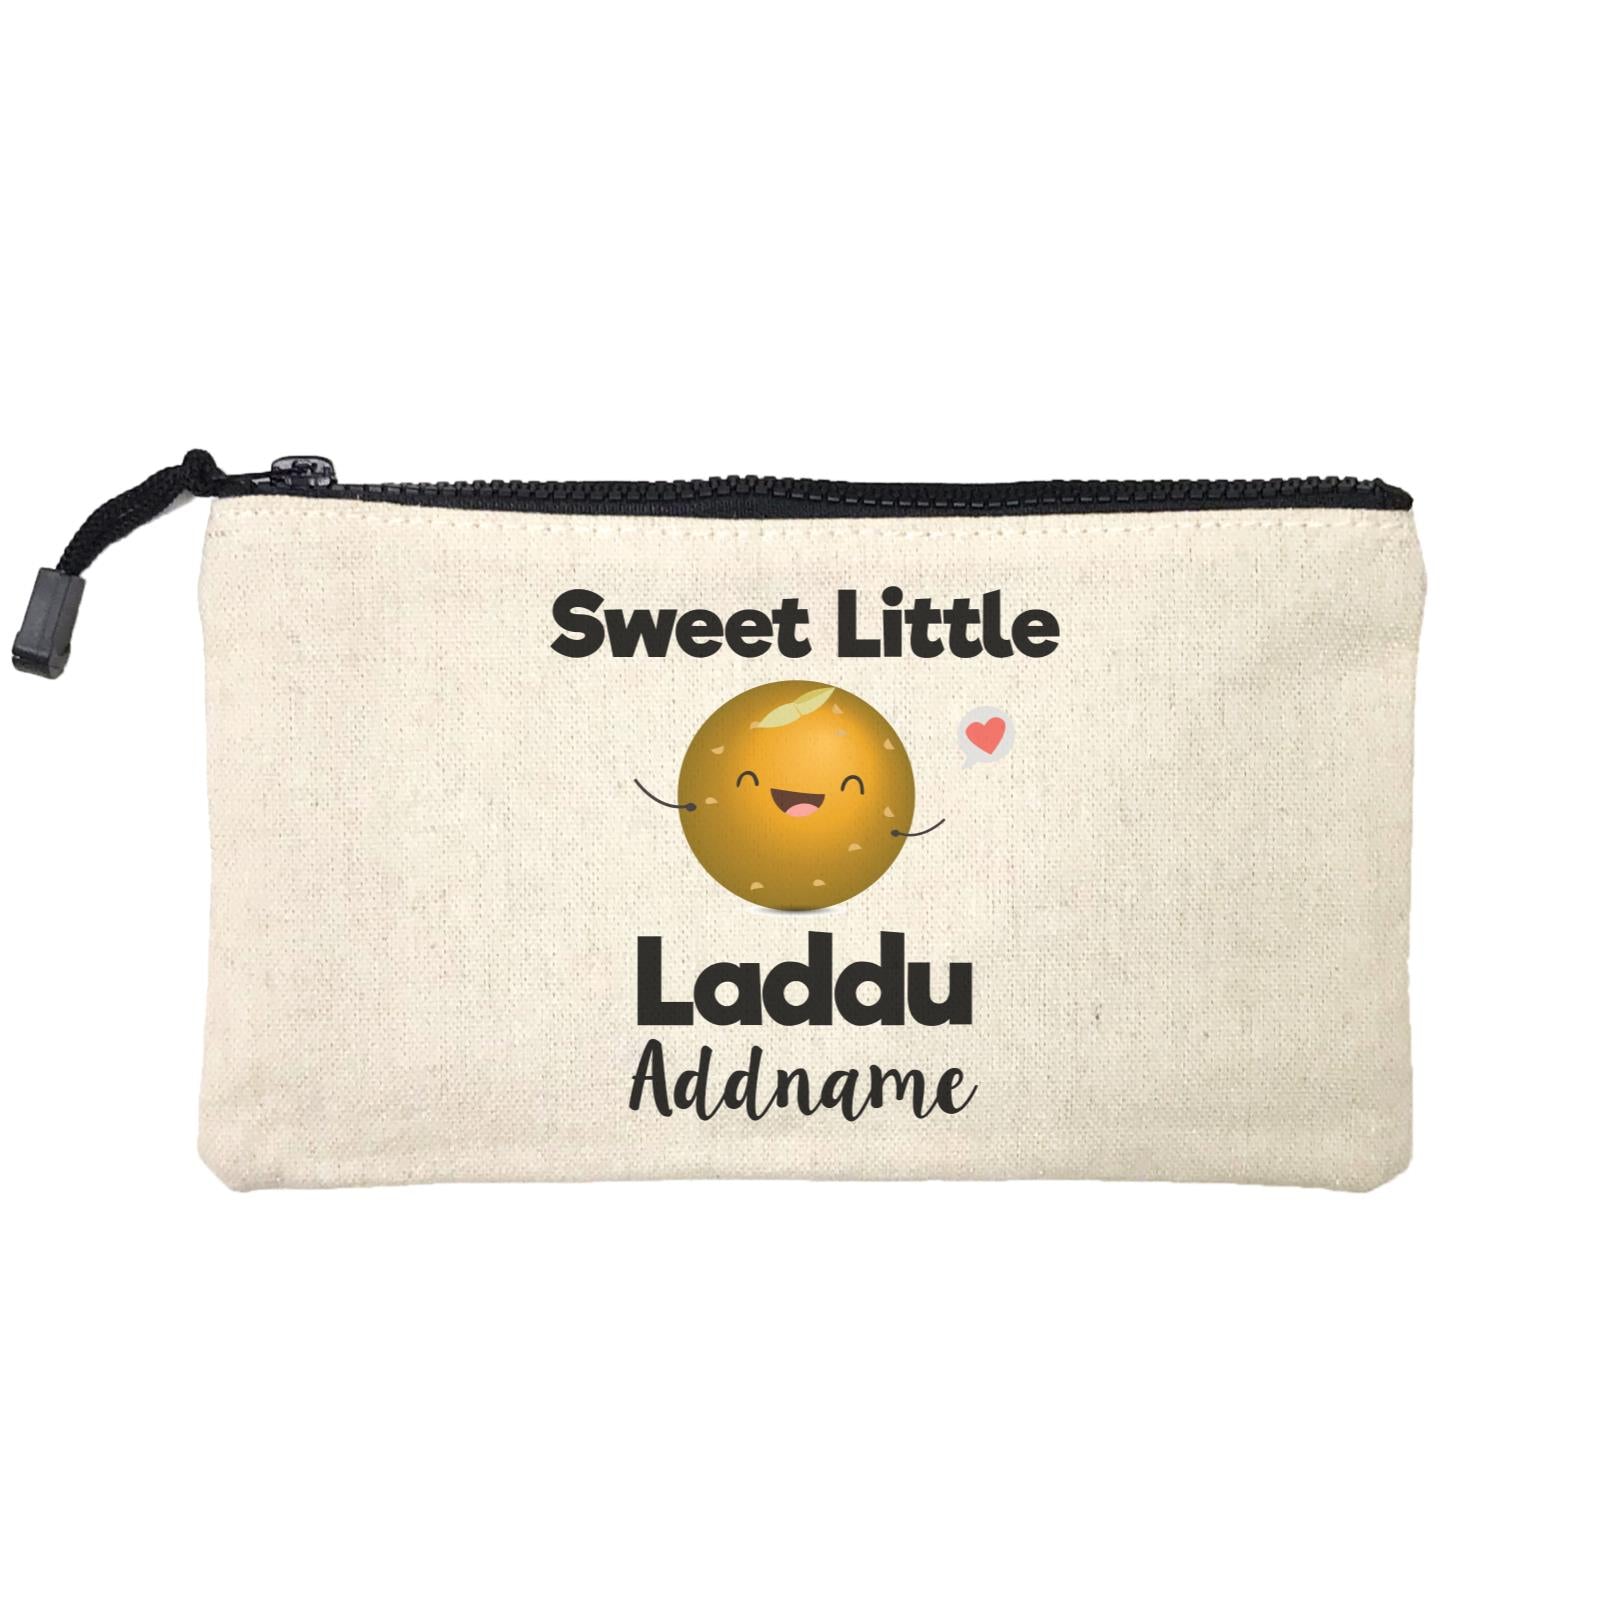 Sweet Little Laddu Addname Mini Accessories Stationery Pouch